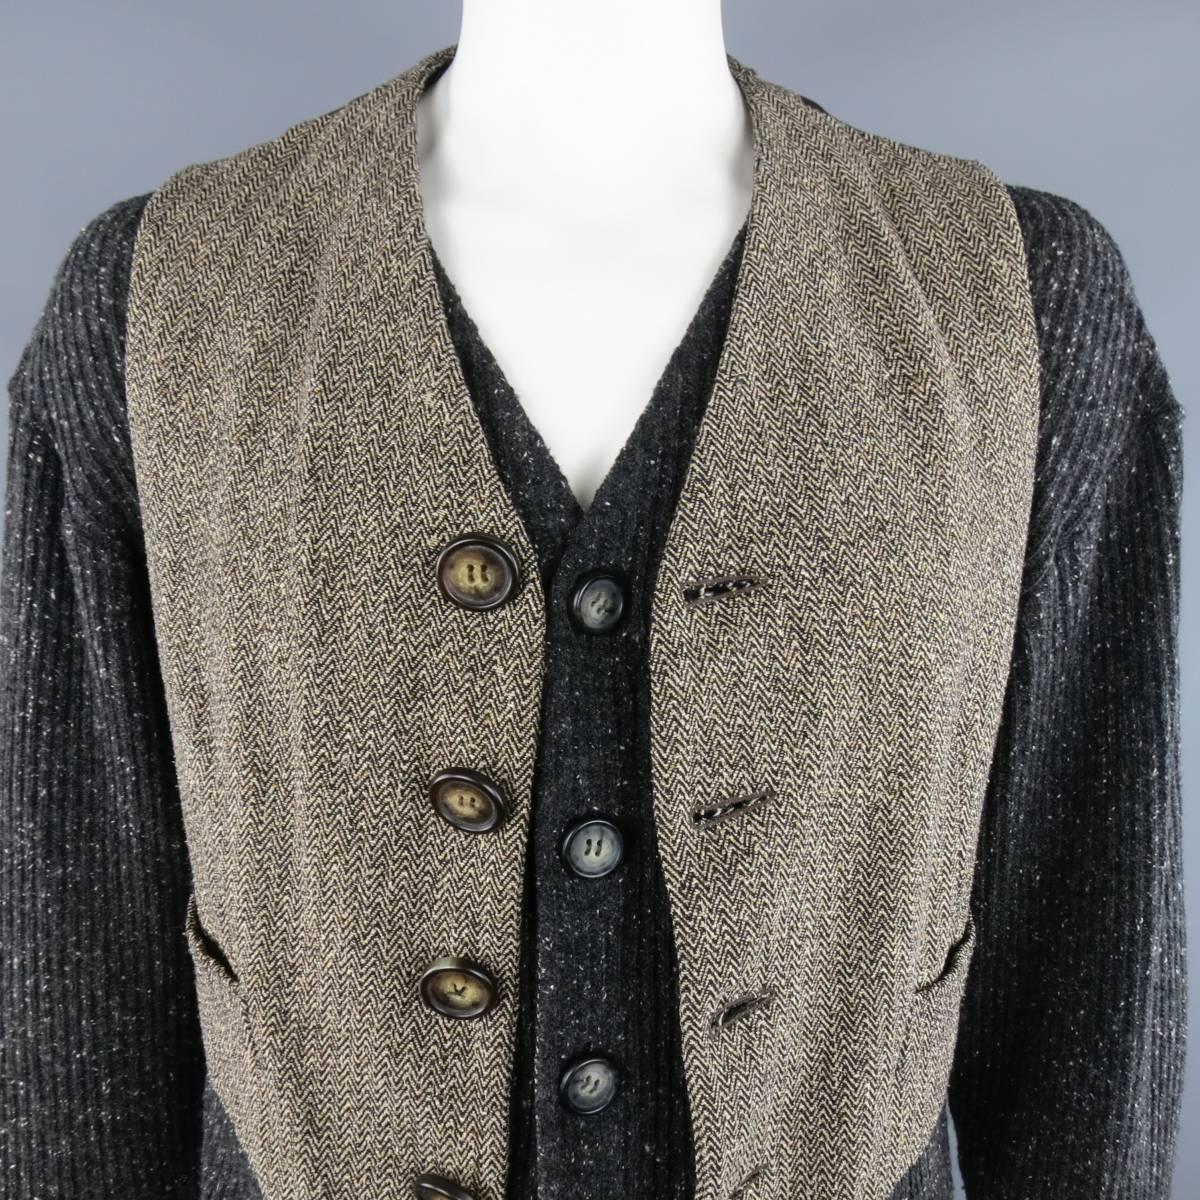 DOLCE & GABBANA Vest consists of wool/ silk material in a dark gray color tone. Designed in a long sleeve with attached vest. Herringbone pattern in a brown tone and heather grey sleeves. Detailed with suede brown elbow patches. Made in Italy.
